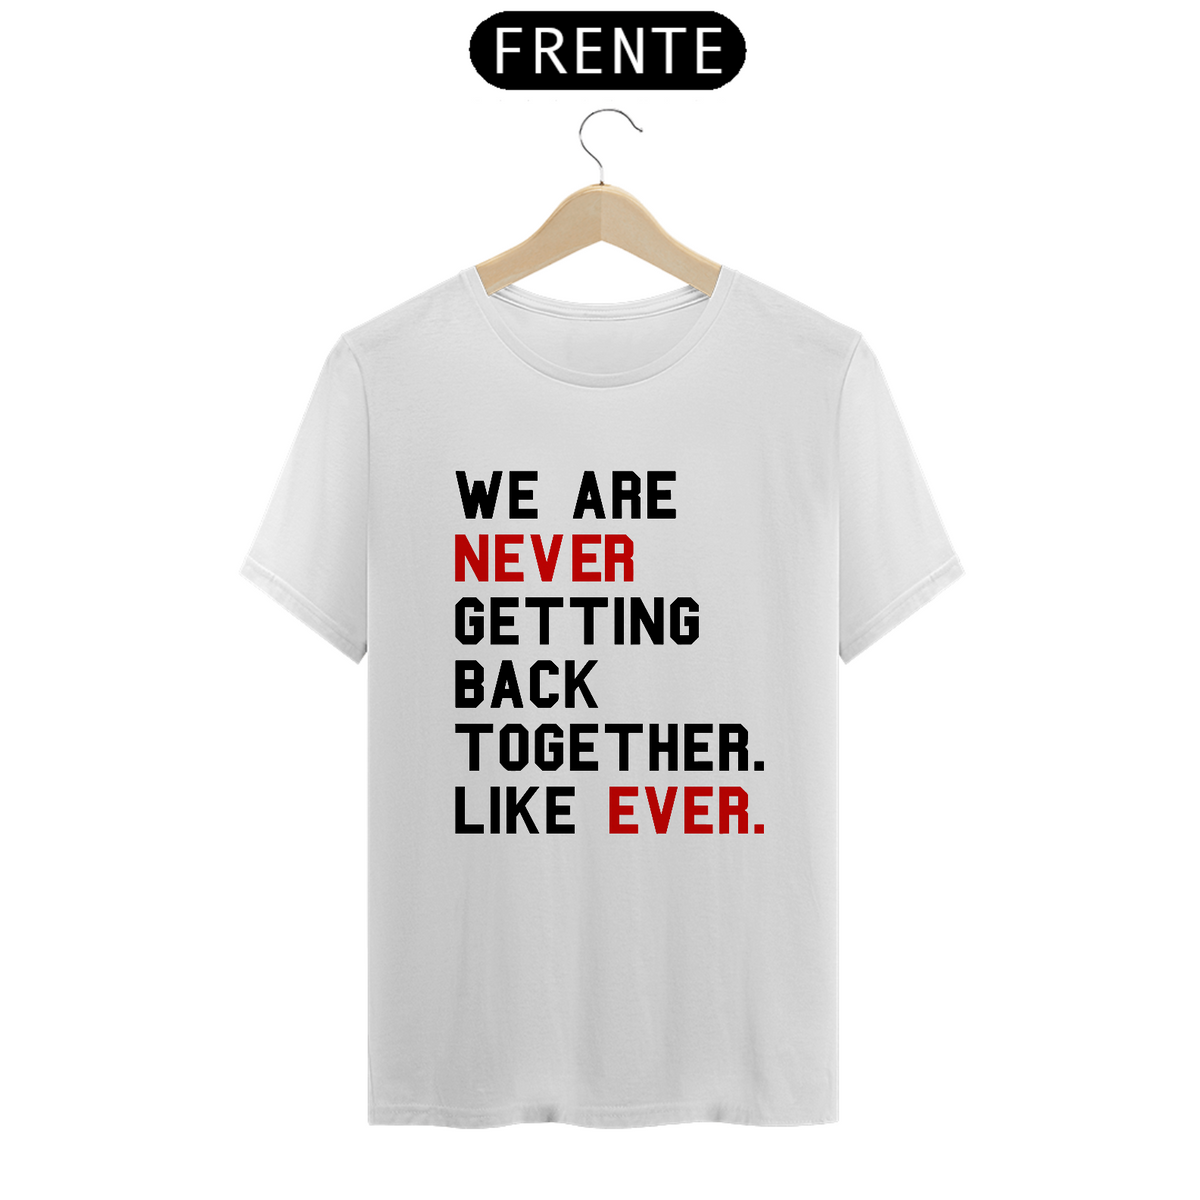 Nome do produto: Camiseta Unissex - Taylor Swift We Are Never Getting Back Together. Like Ever